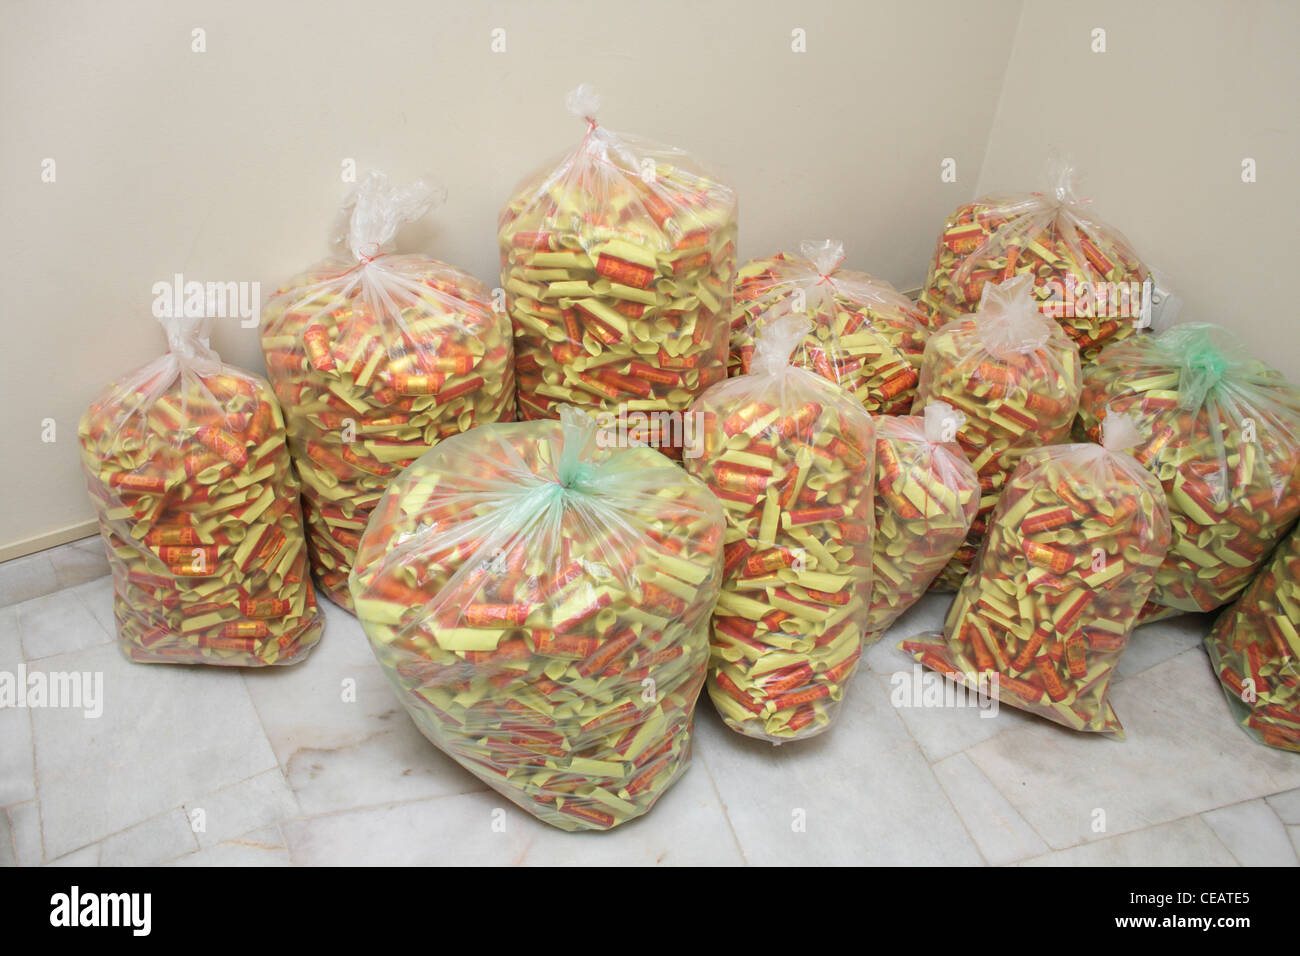 bags of joss paper for burning during Chinese funerals or as offering Stock Photo